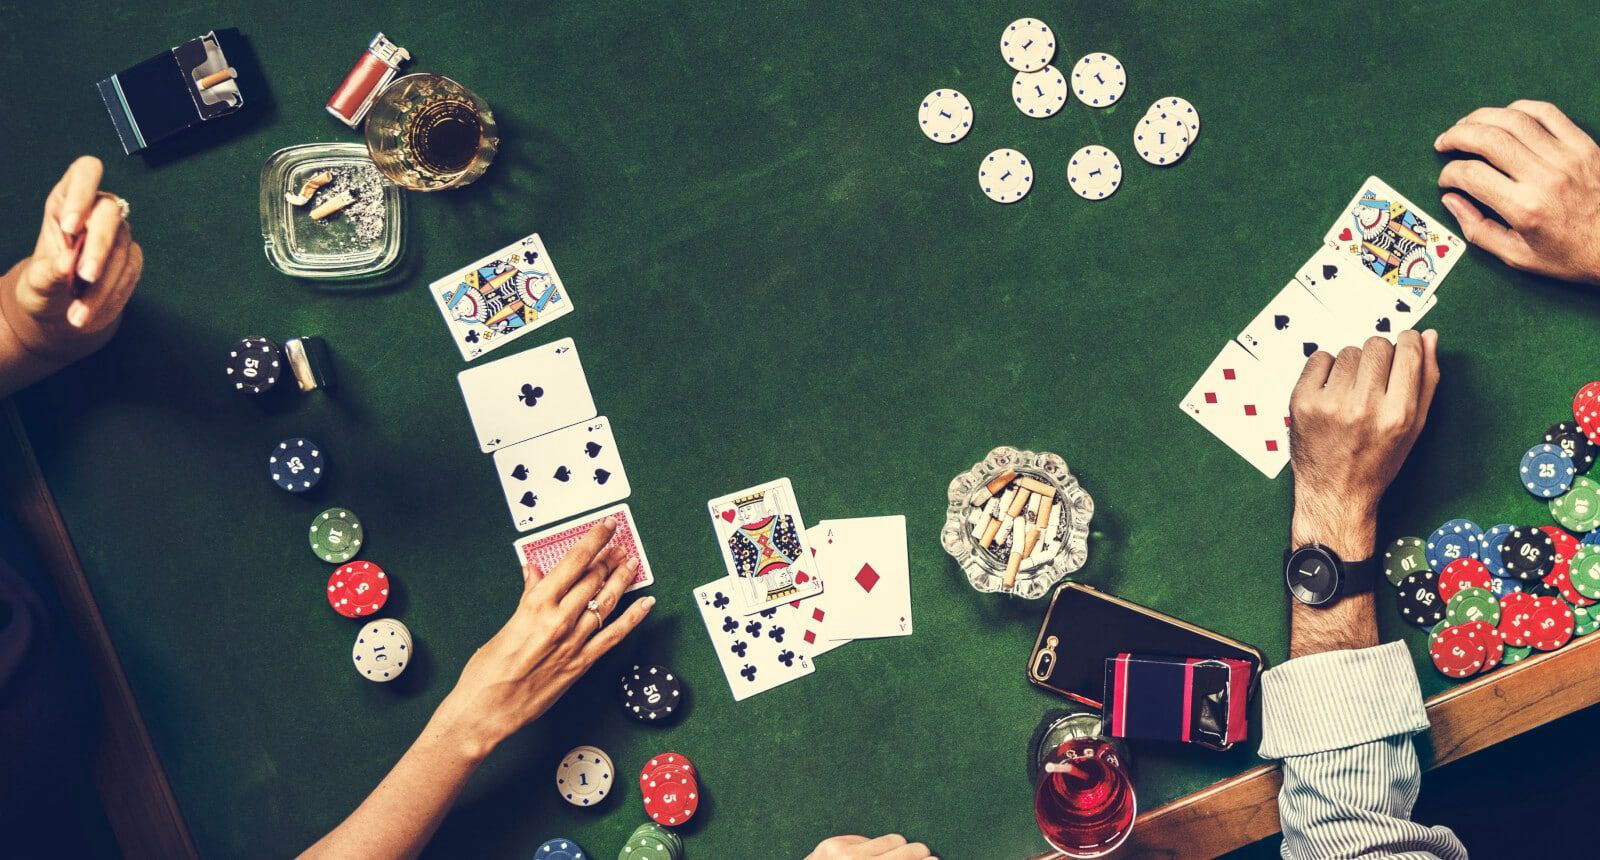 You are currently viewing Debunking the Top 5 Casino Myths: What You Need to Know Before You Play | The African Exponent.